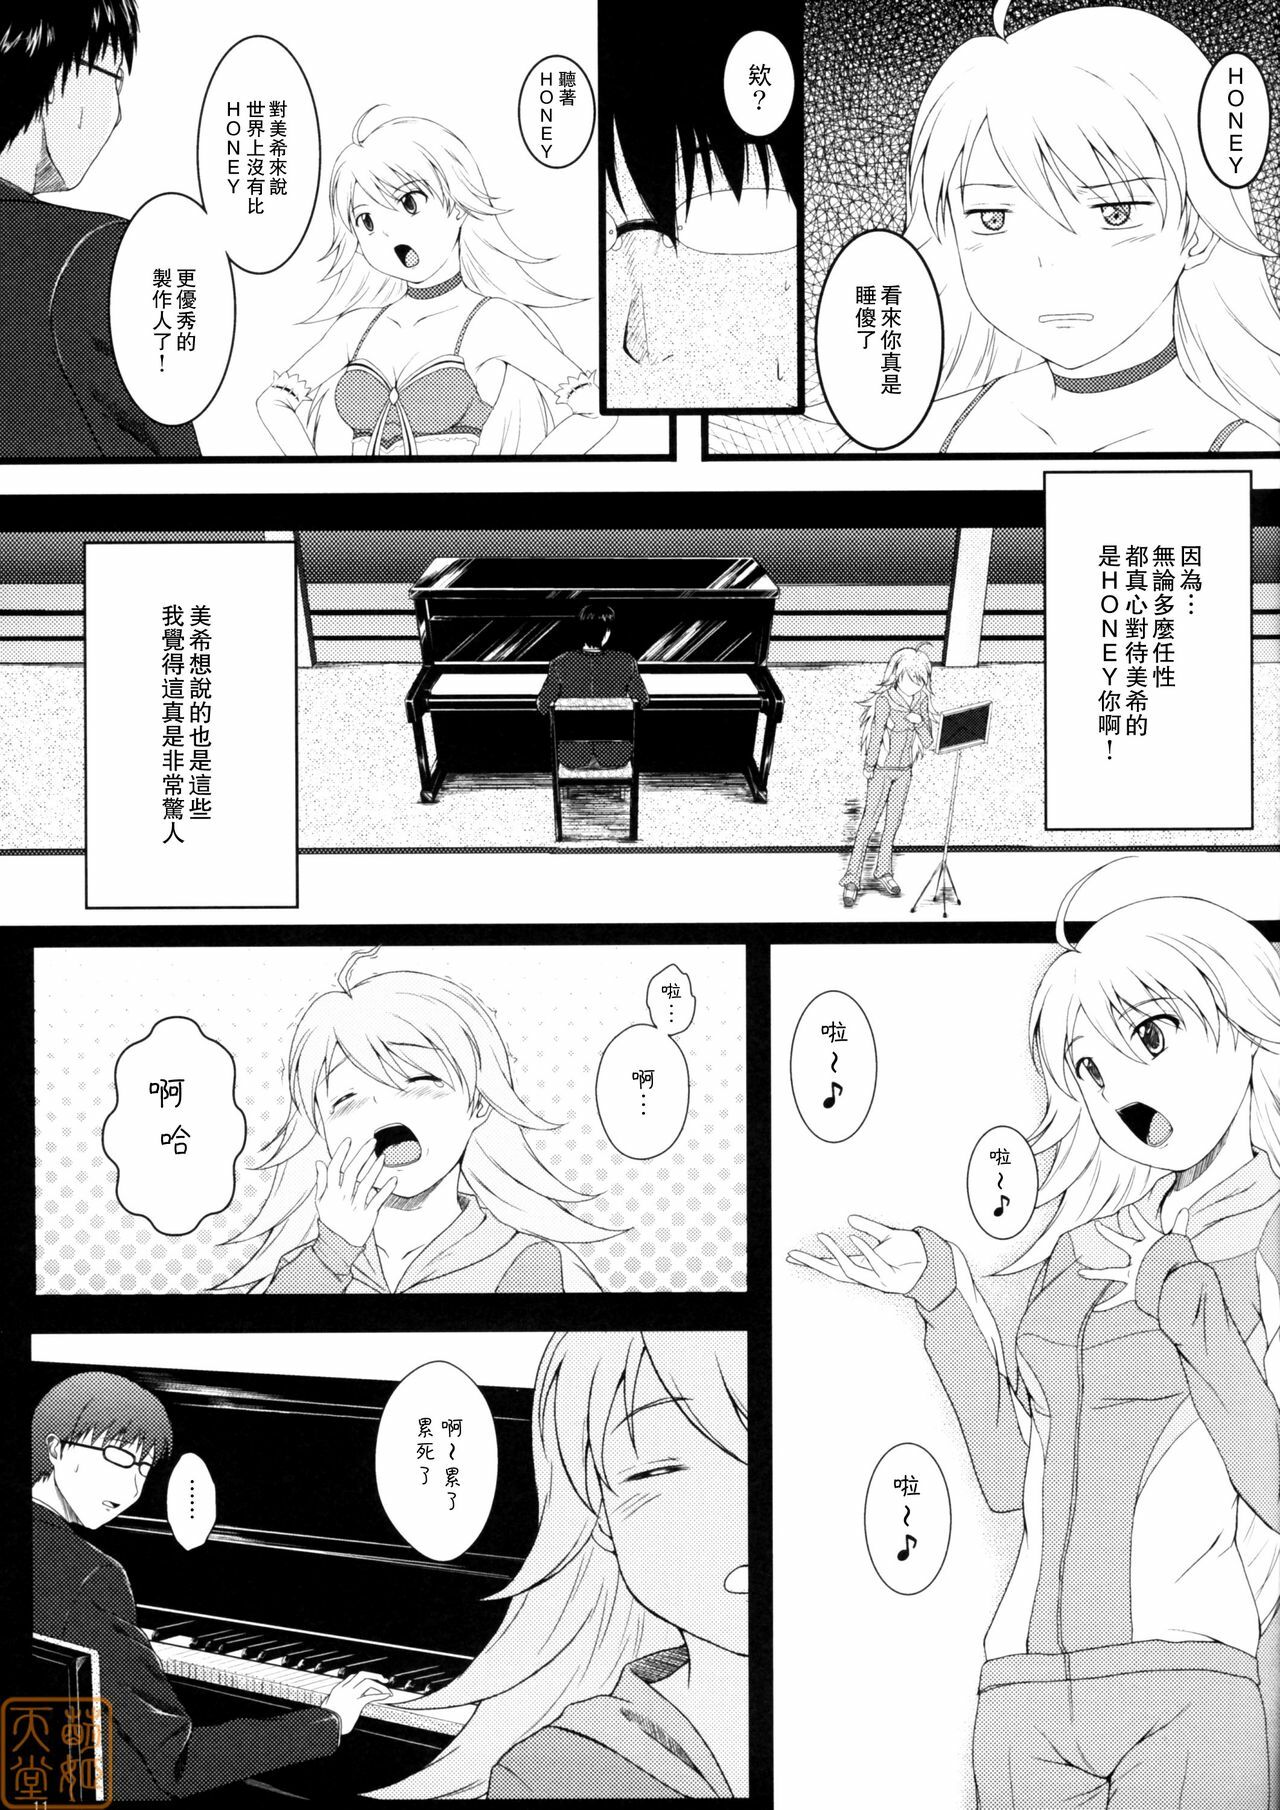 (C75) [Count2.4 (Nishi)] Love x 2 Shining Star (THE iDOLM@STER) [Chinese] [萌姬天堂] page 10 full